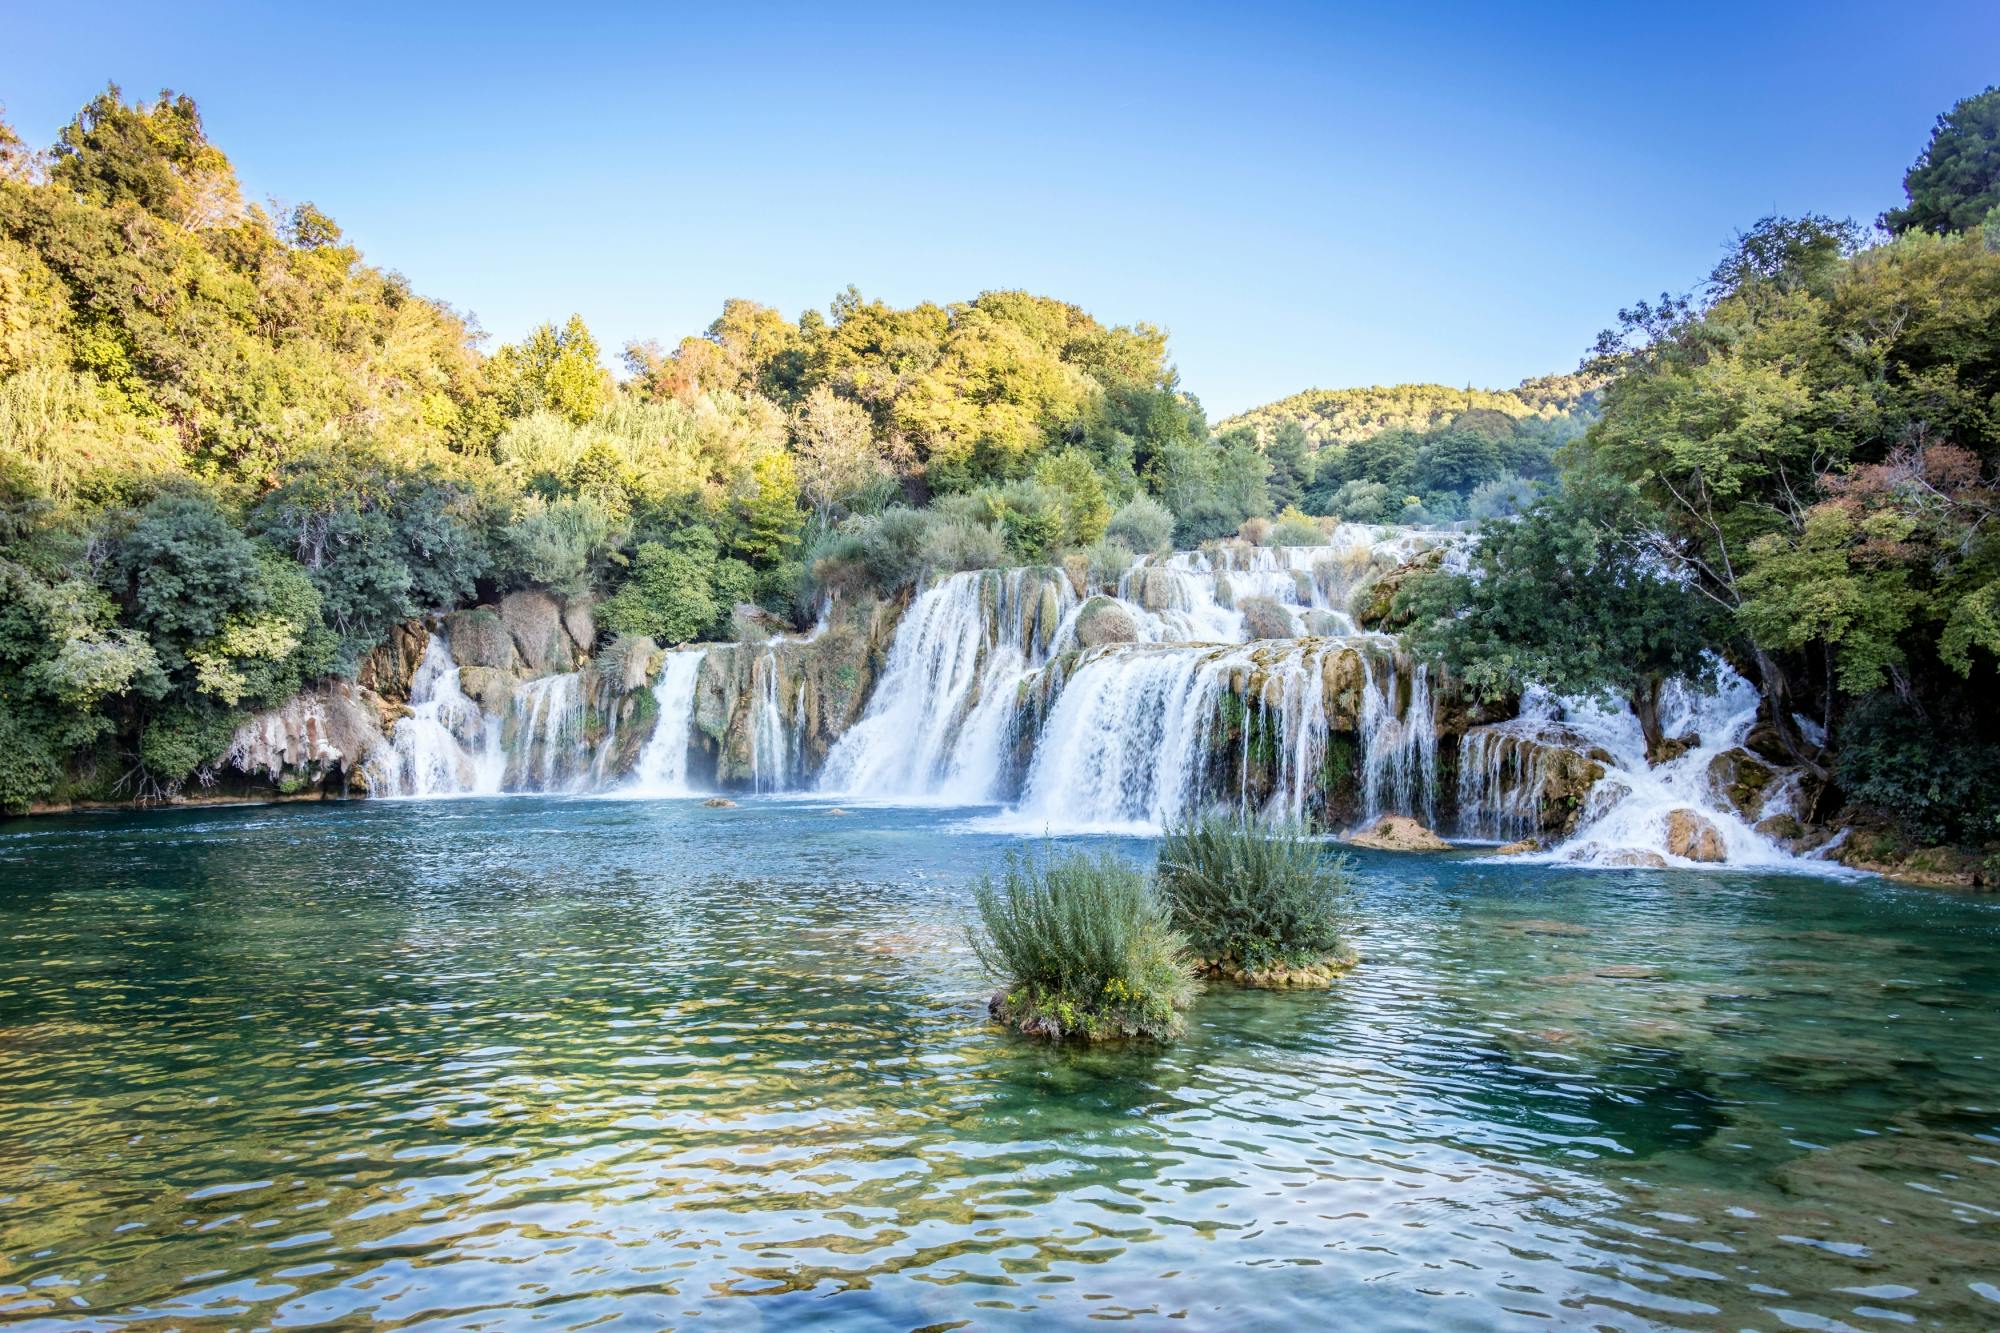 Private day-tour to Krka waterfalls from Dubrovnik